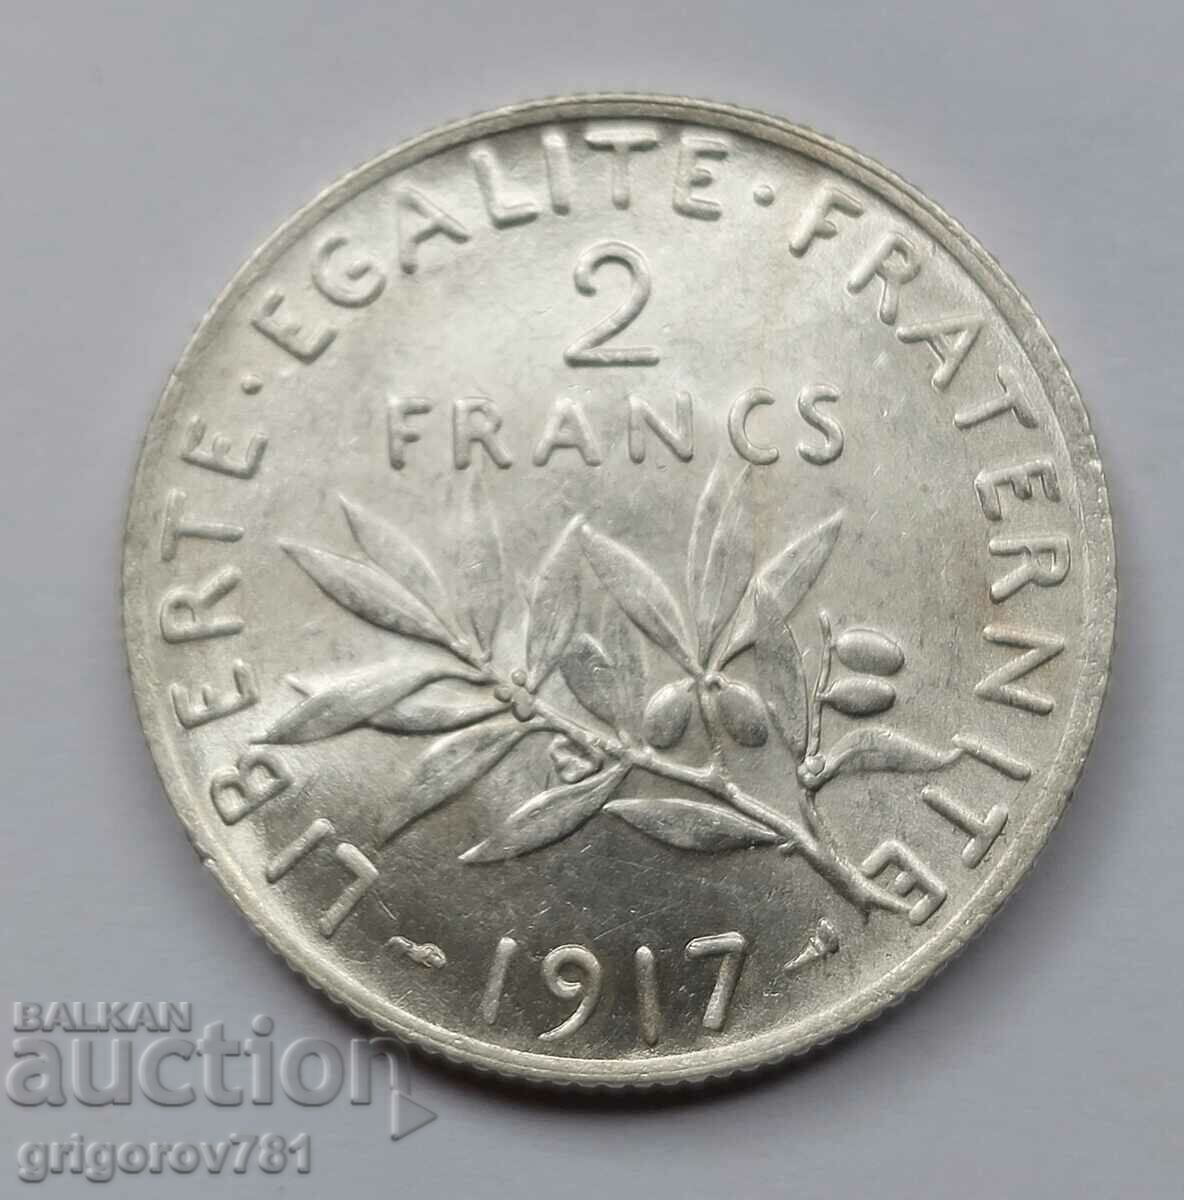 2 Francs Silver France 1917 - Silver Coin #129